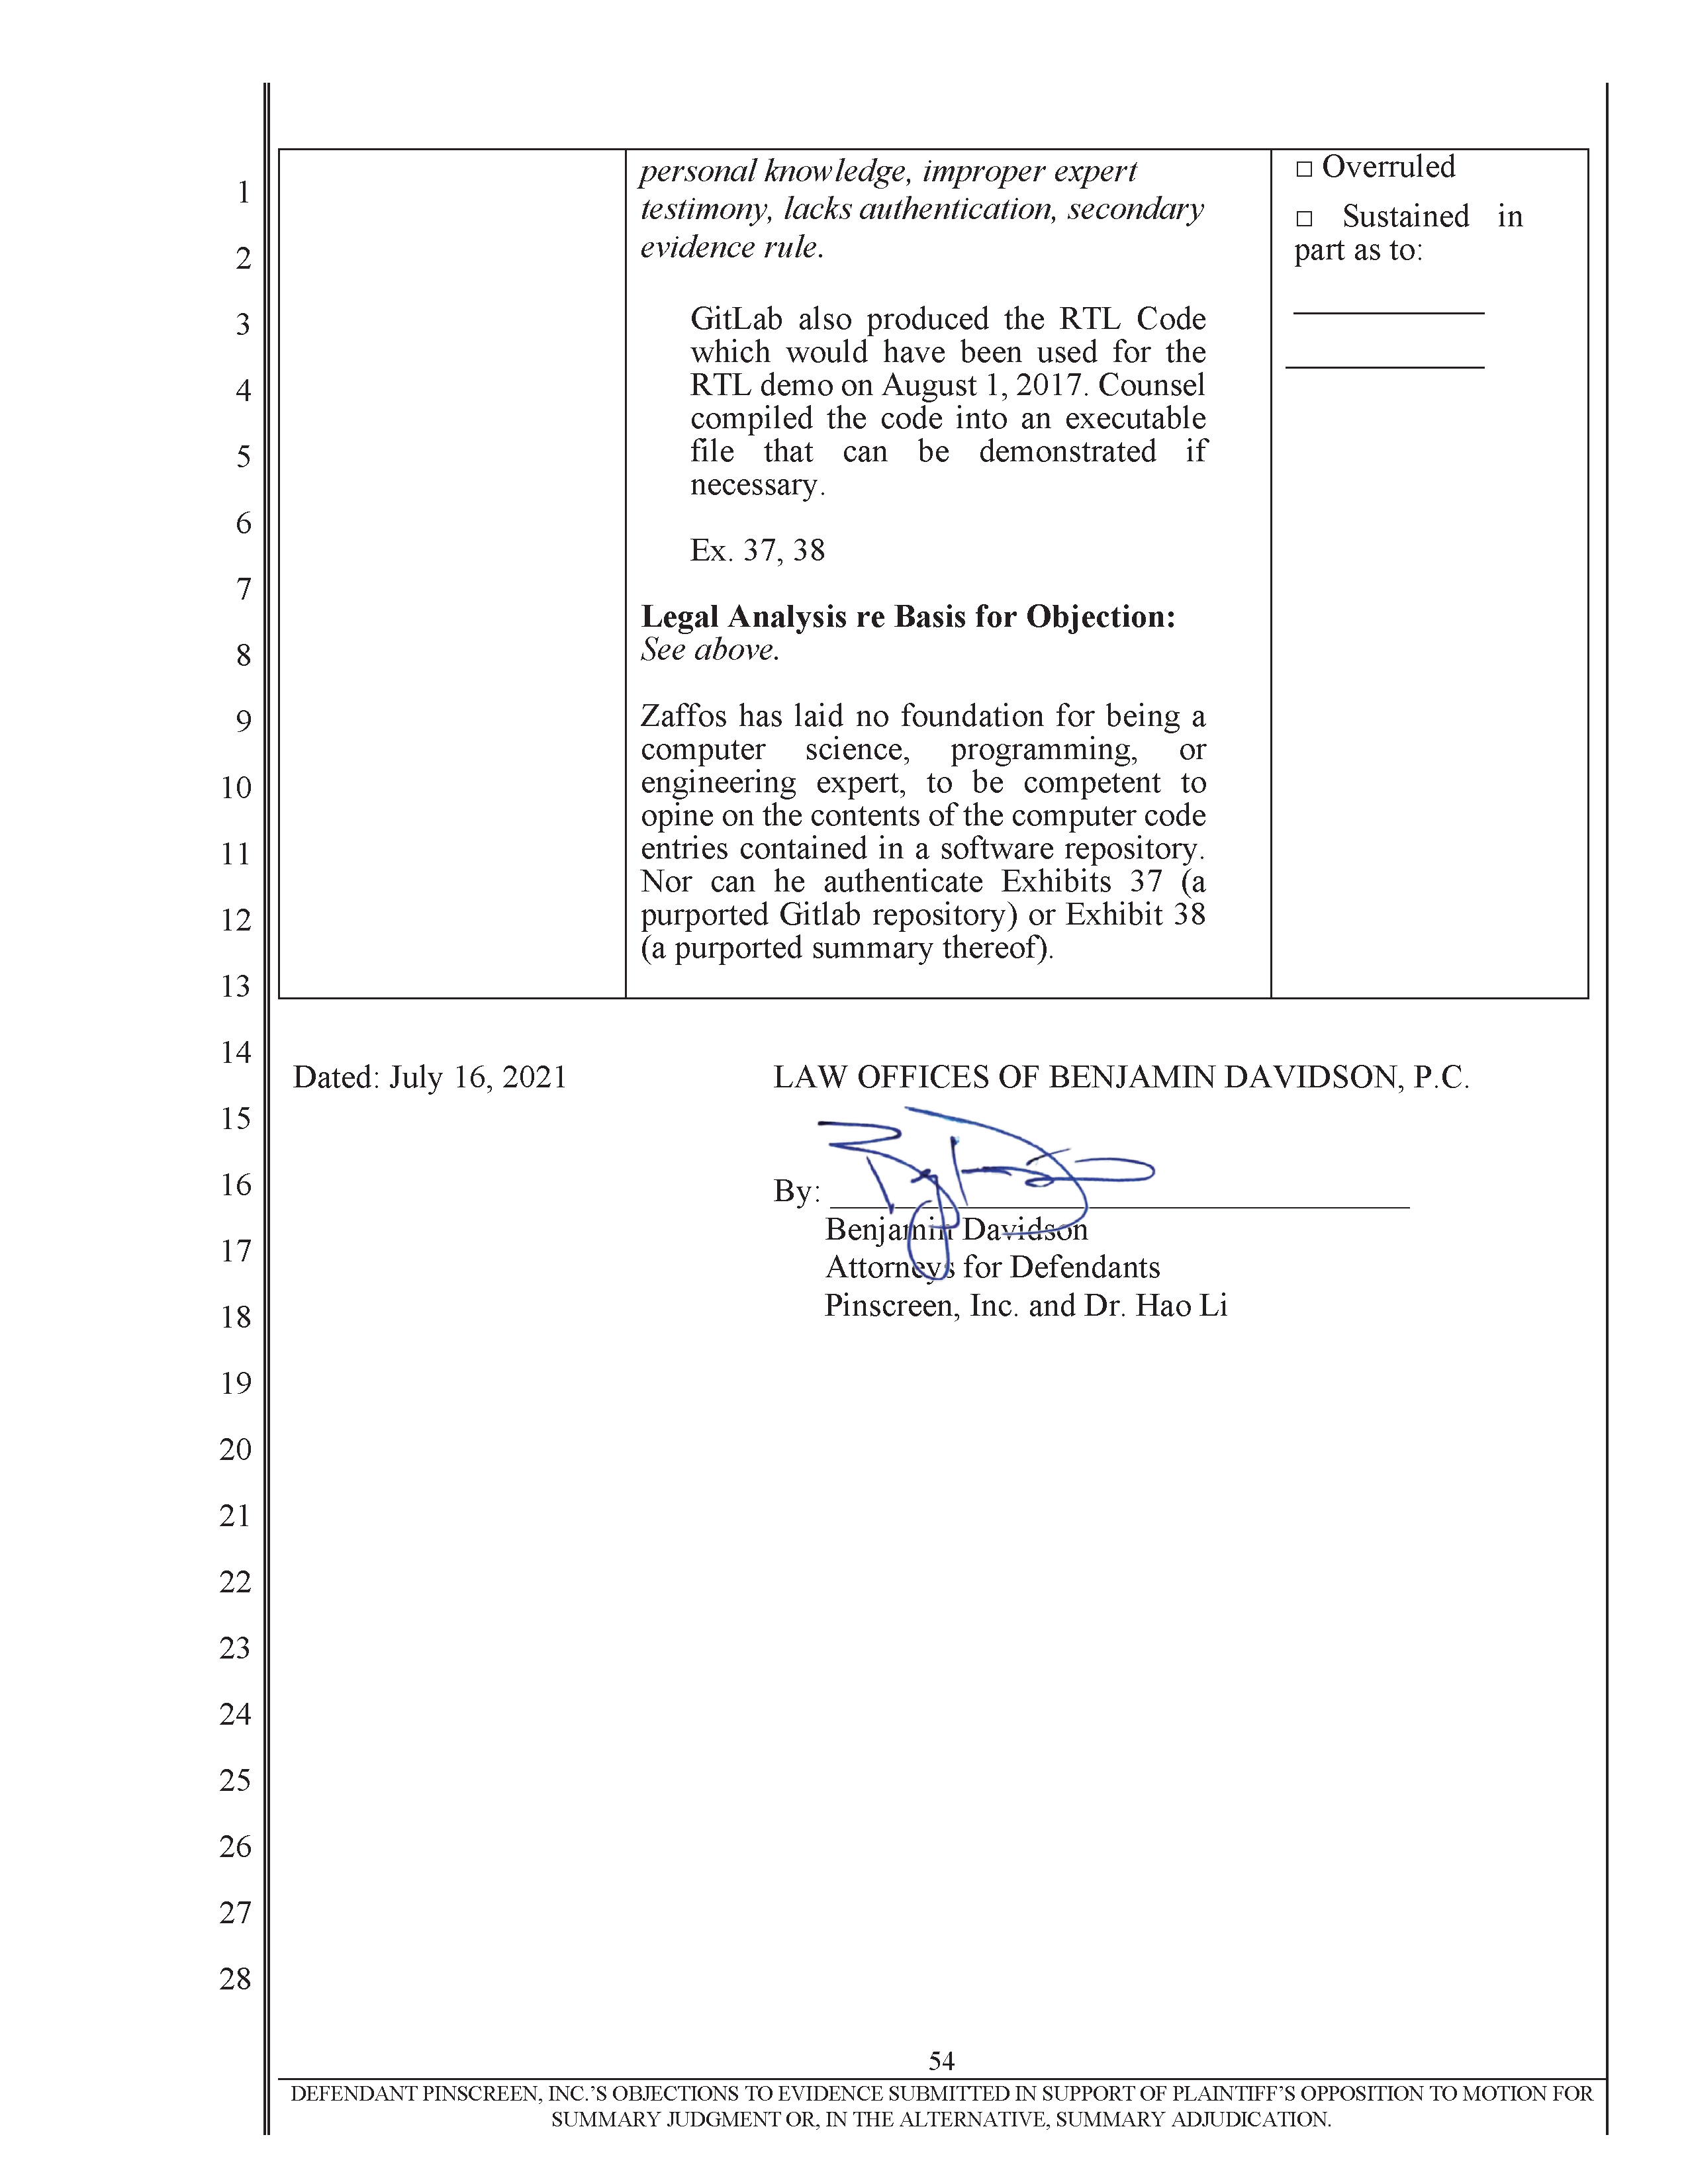 Pinscreen’s Motion to Seal USC’s Investigation of Hao Li’s Scientific Misconduct Page 61